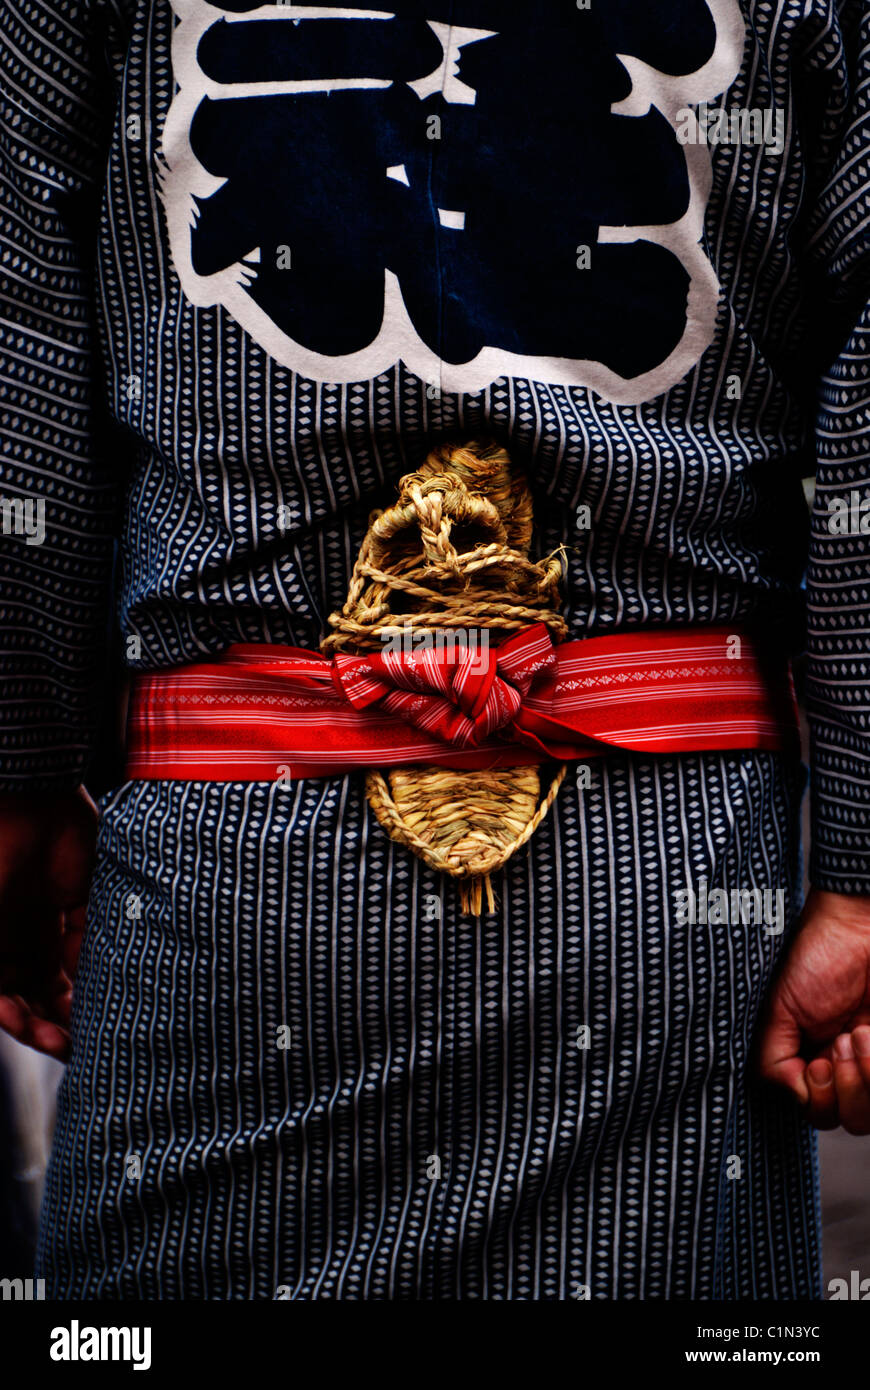 A Japanese man wears a traditional blue yukata kimono with a red obi and has straw sandals (zori) tucked into his belt. Stock Photo